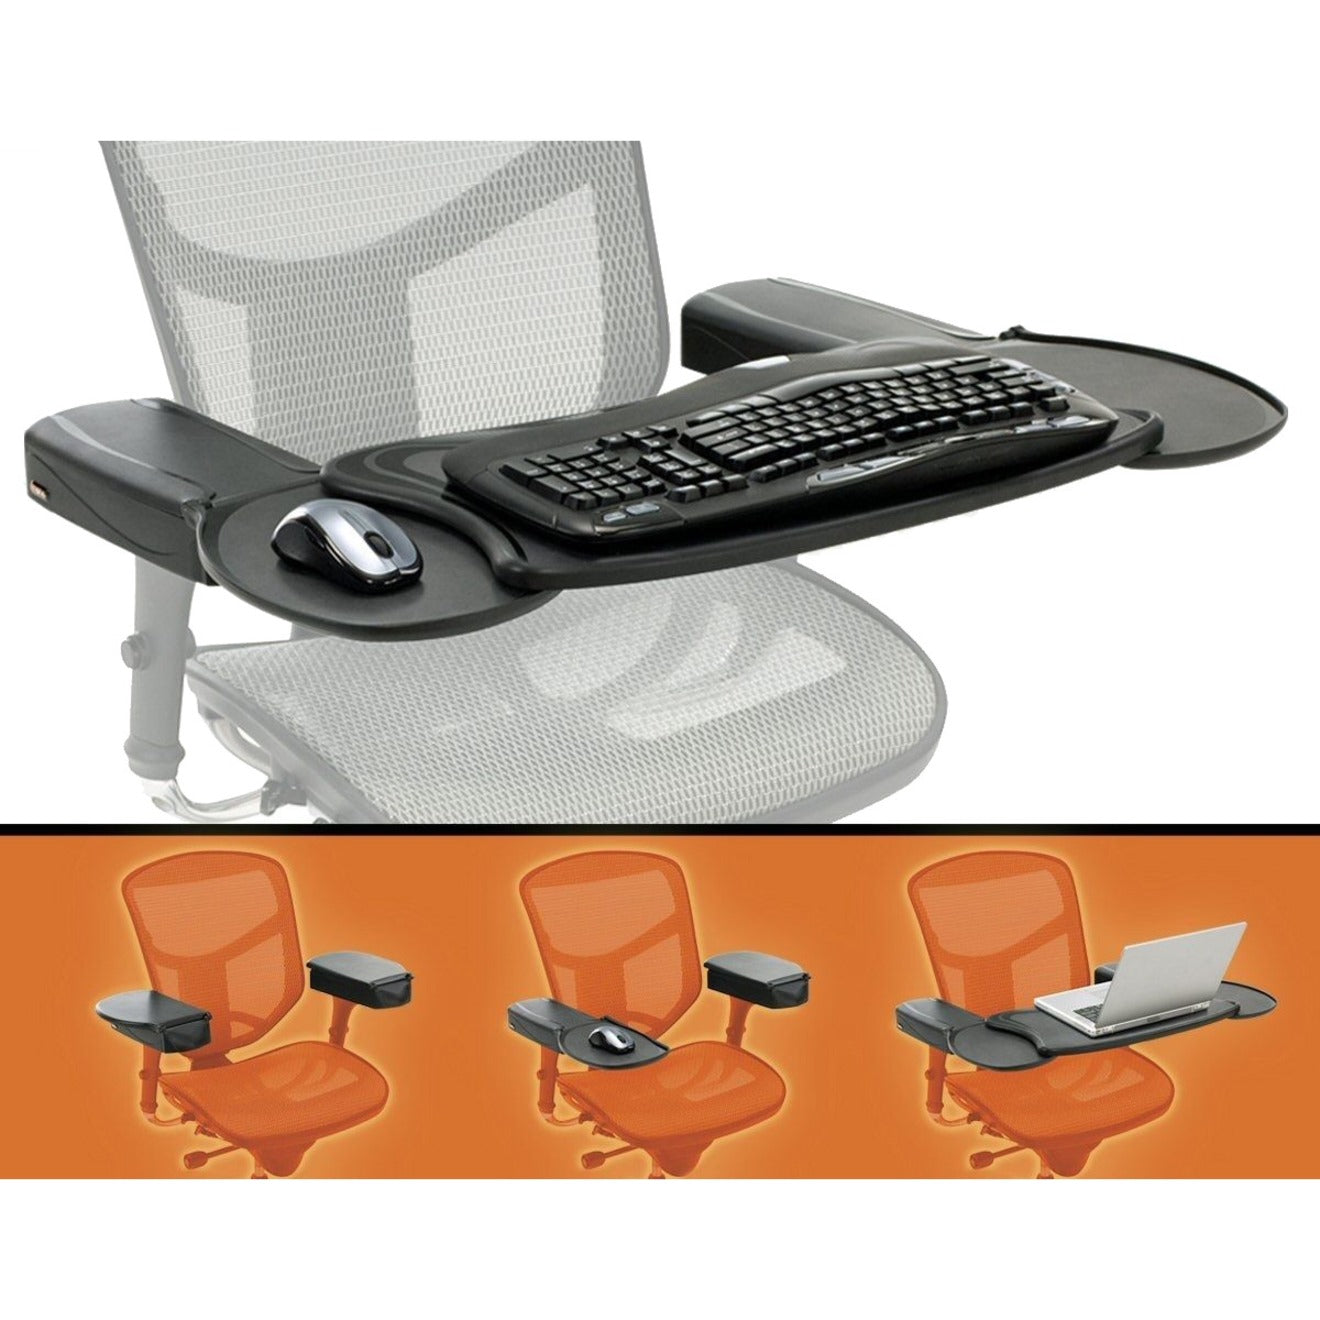 Ergoguys MECS-BLK-001 Mobo Chair Mount Ergo Keyboard and Mouse Tray System